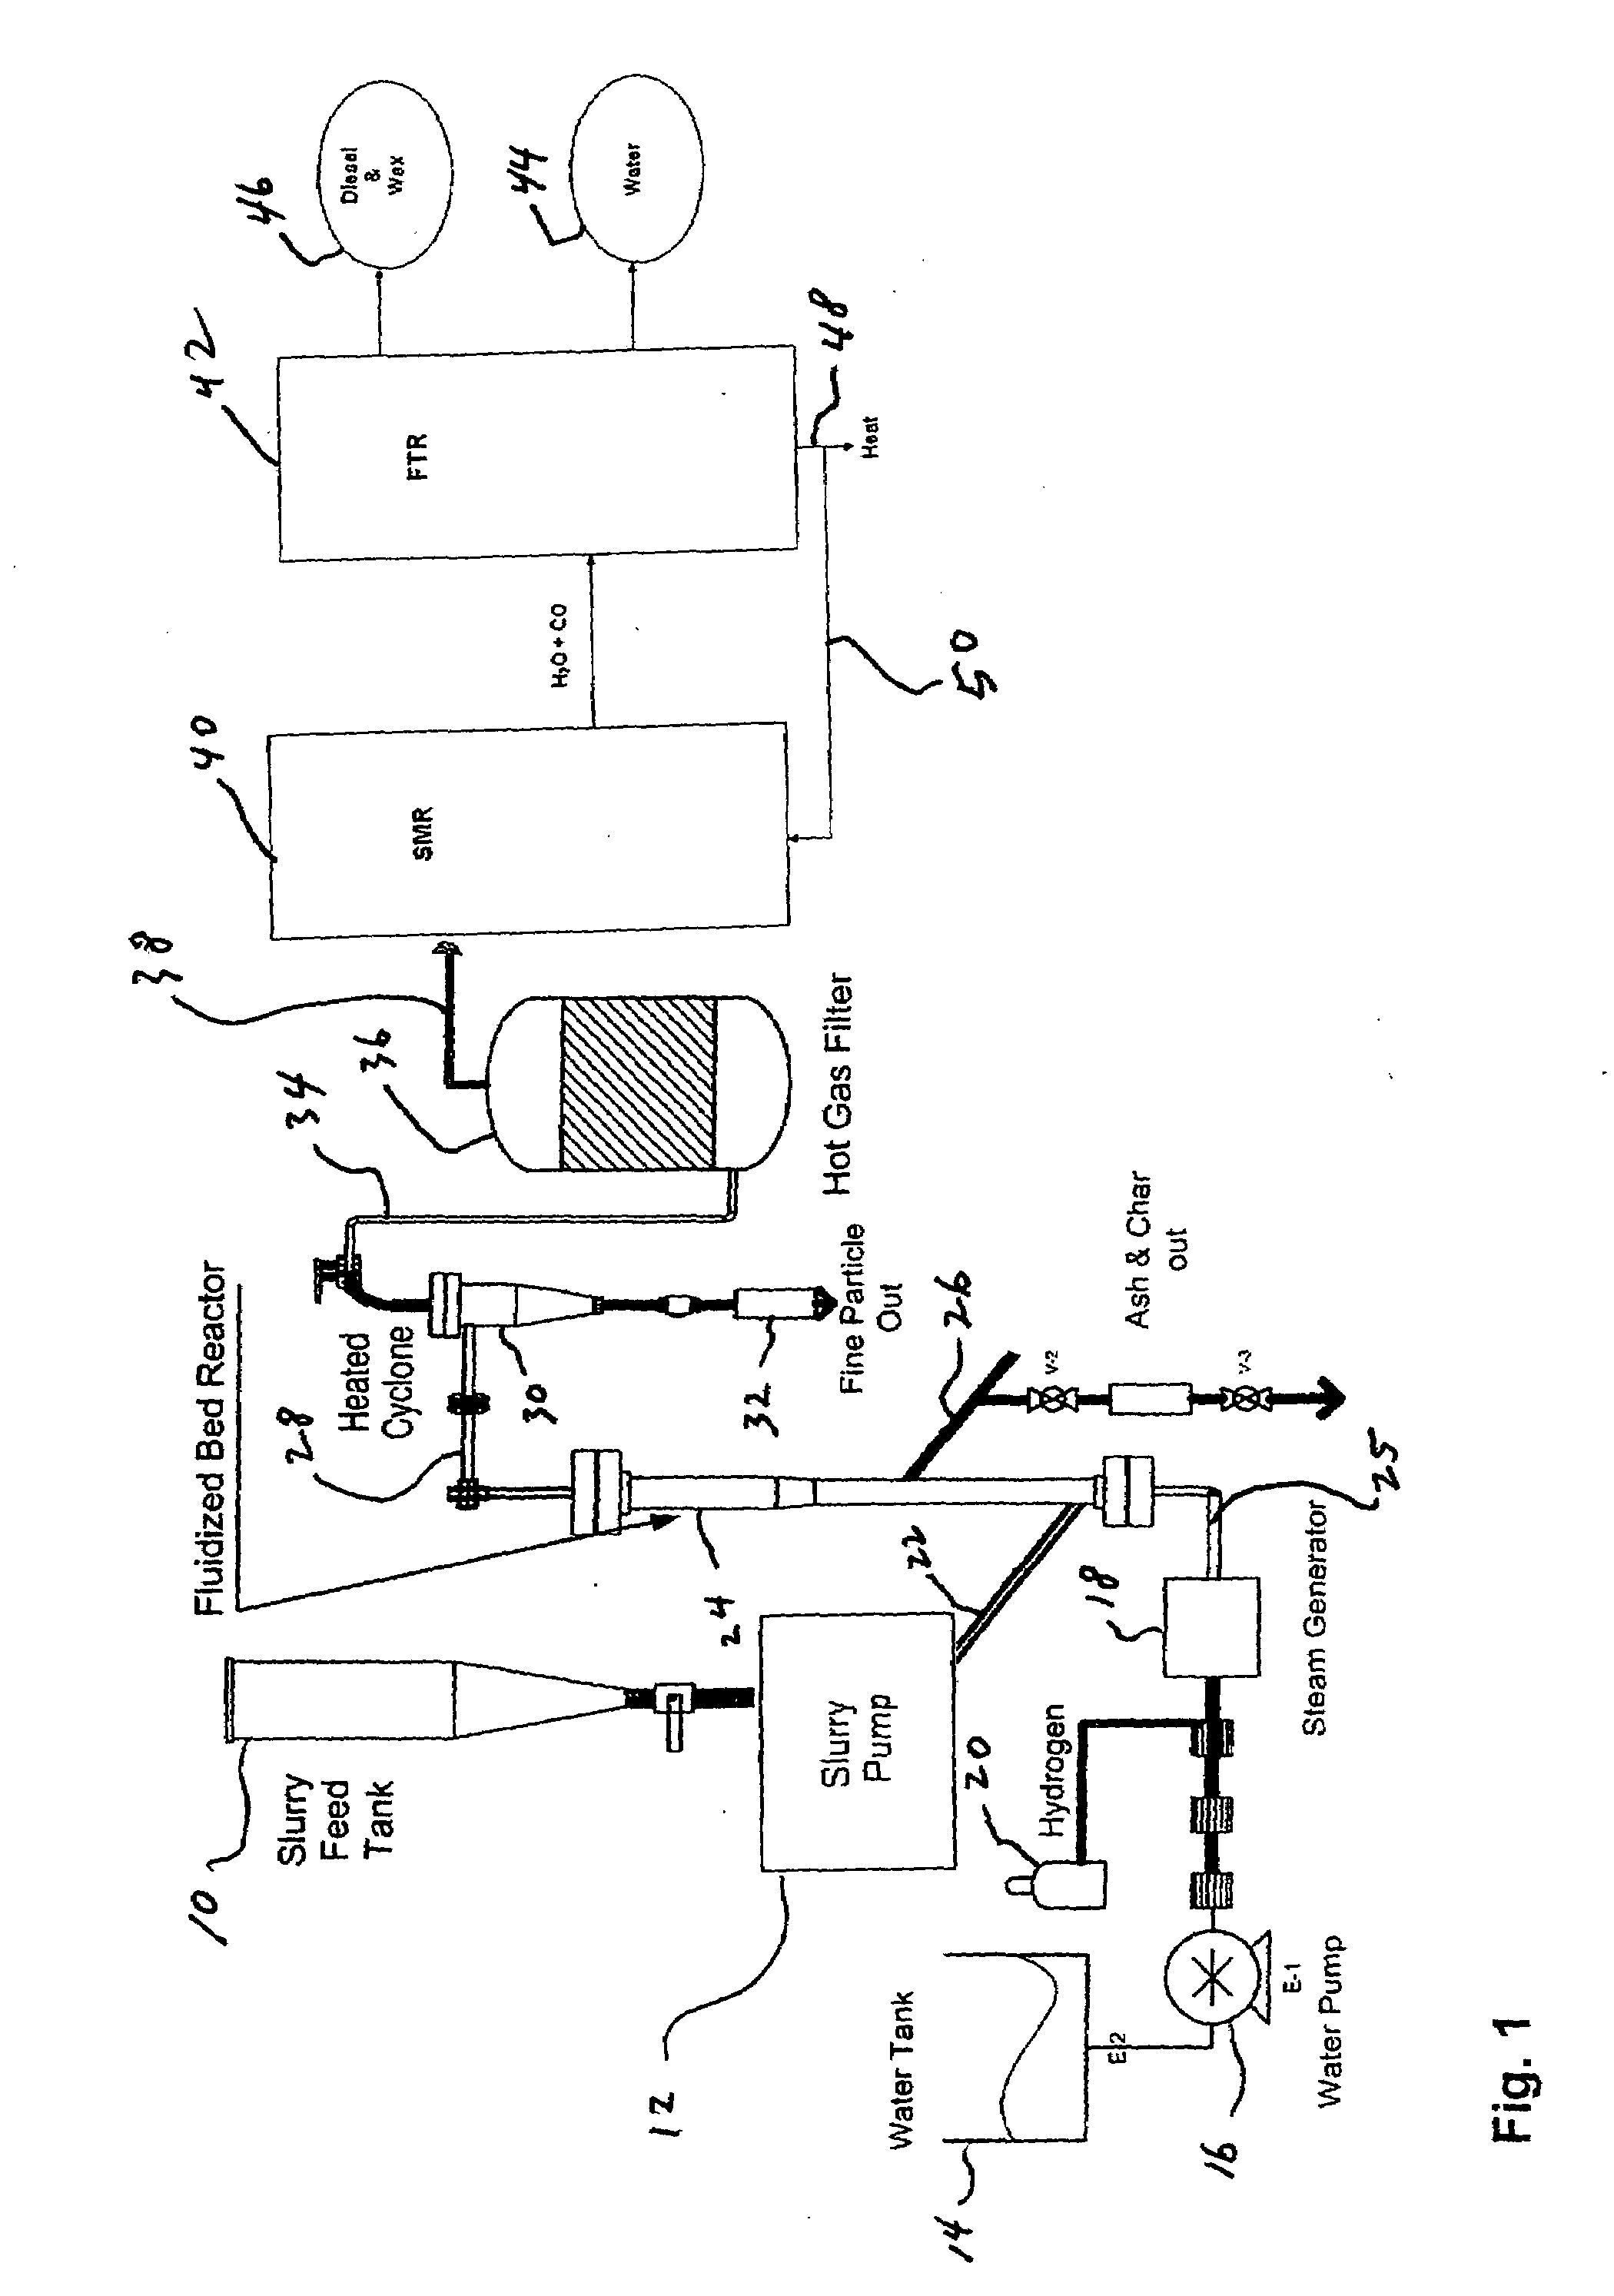 Operation of a steam hydro-gasifier in a fluidized bed reactor